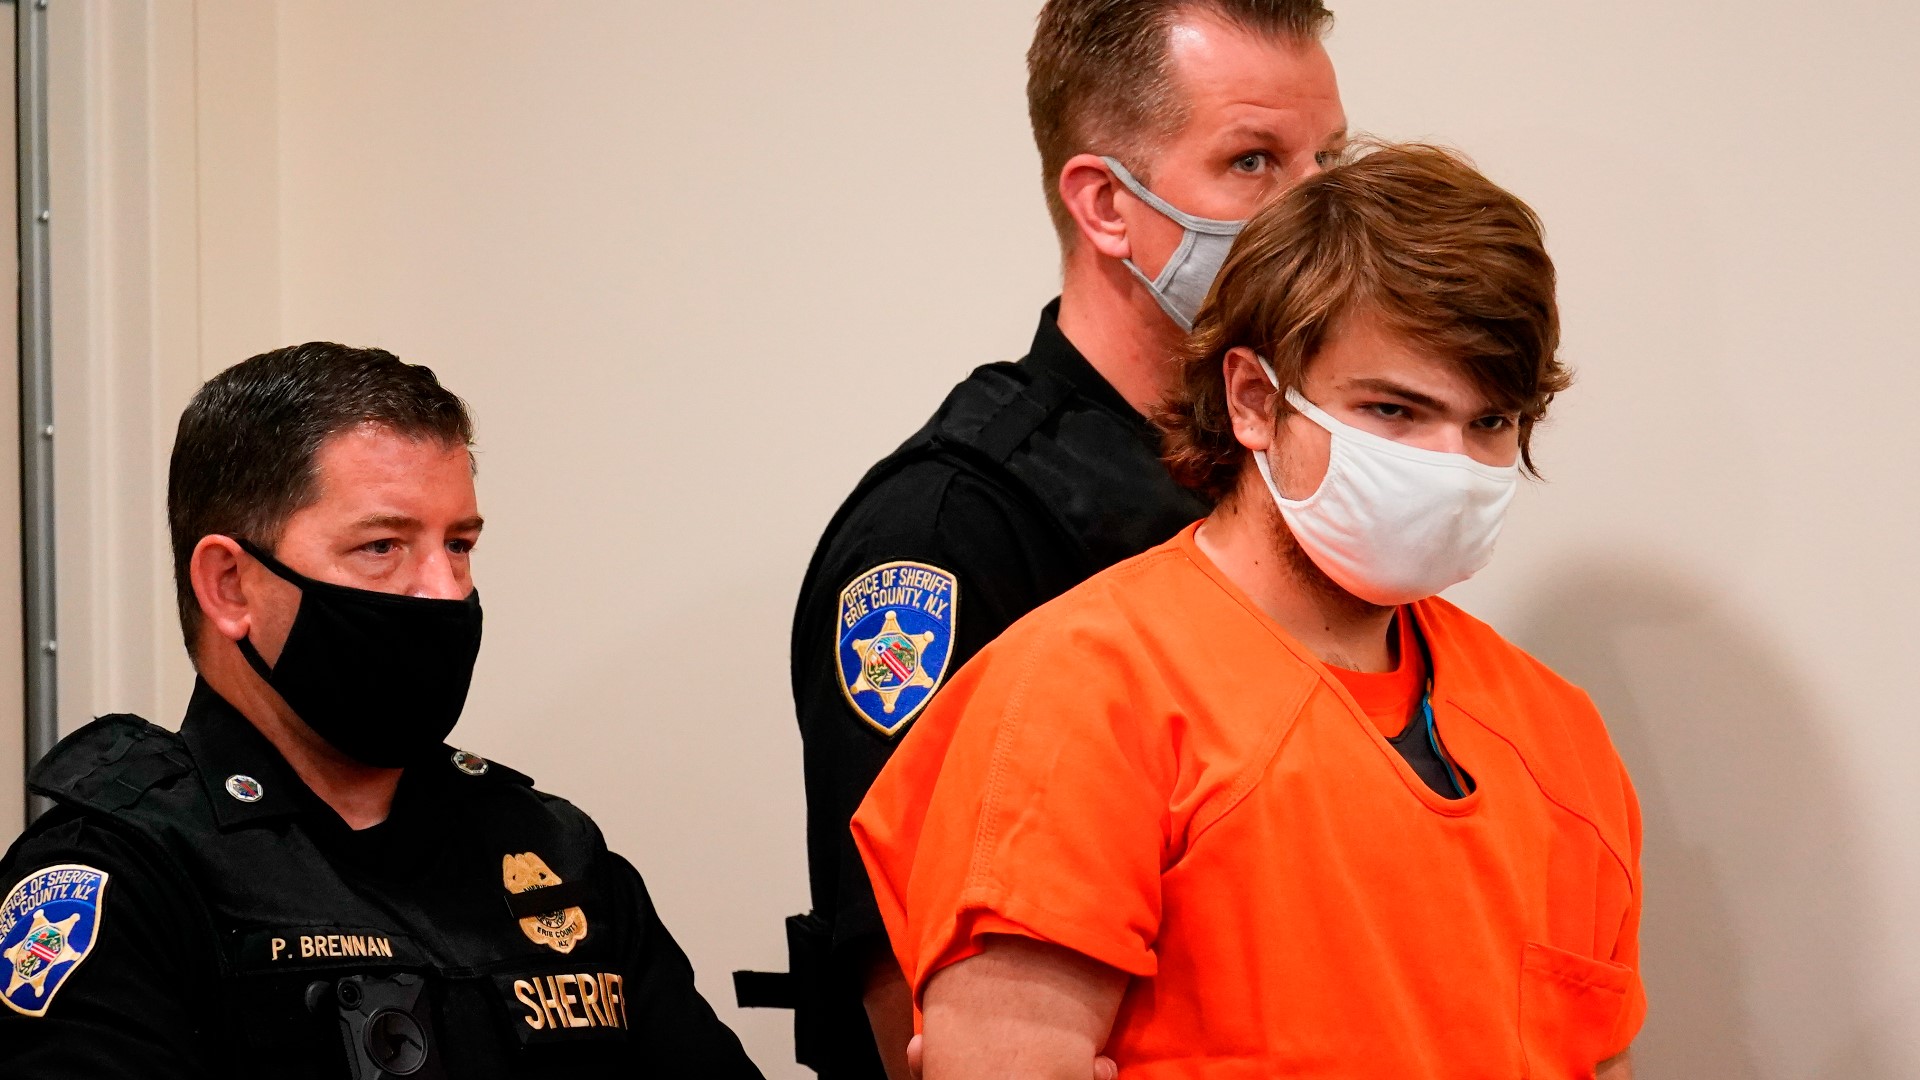 Payton Gendron previously pleaded not guilty to separate federal hate crime charges that could result in a death sentence if he is convicted.